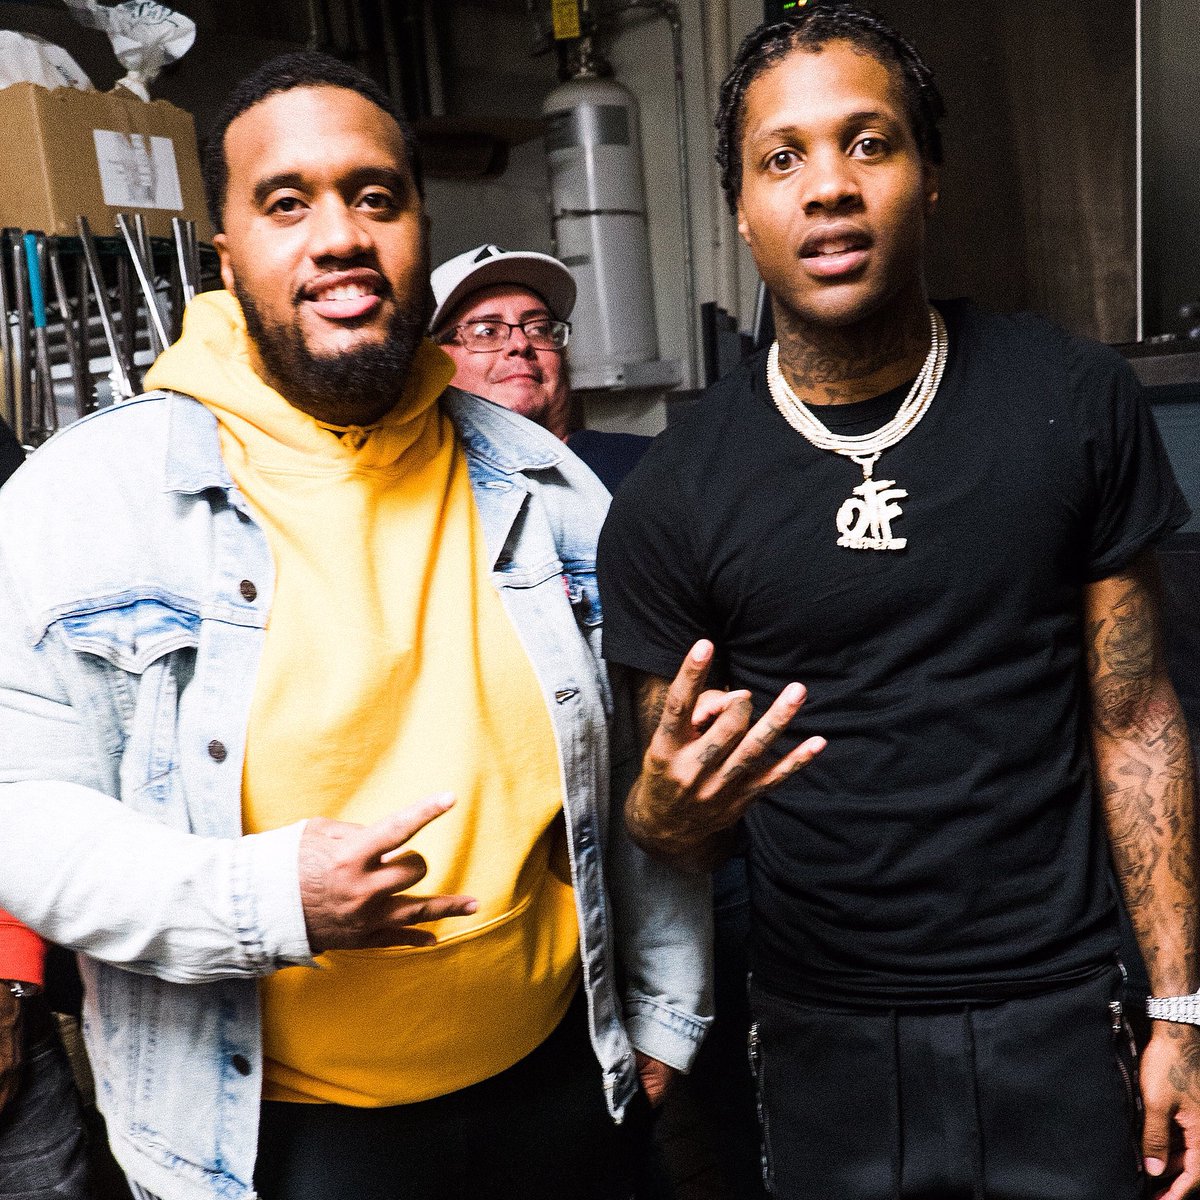 Get with your dawg and make it right @lildurk #Brothers4Life #OTF.